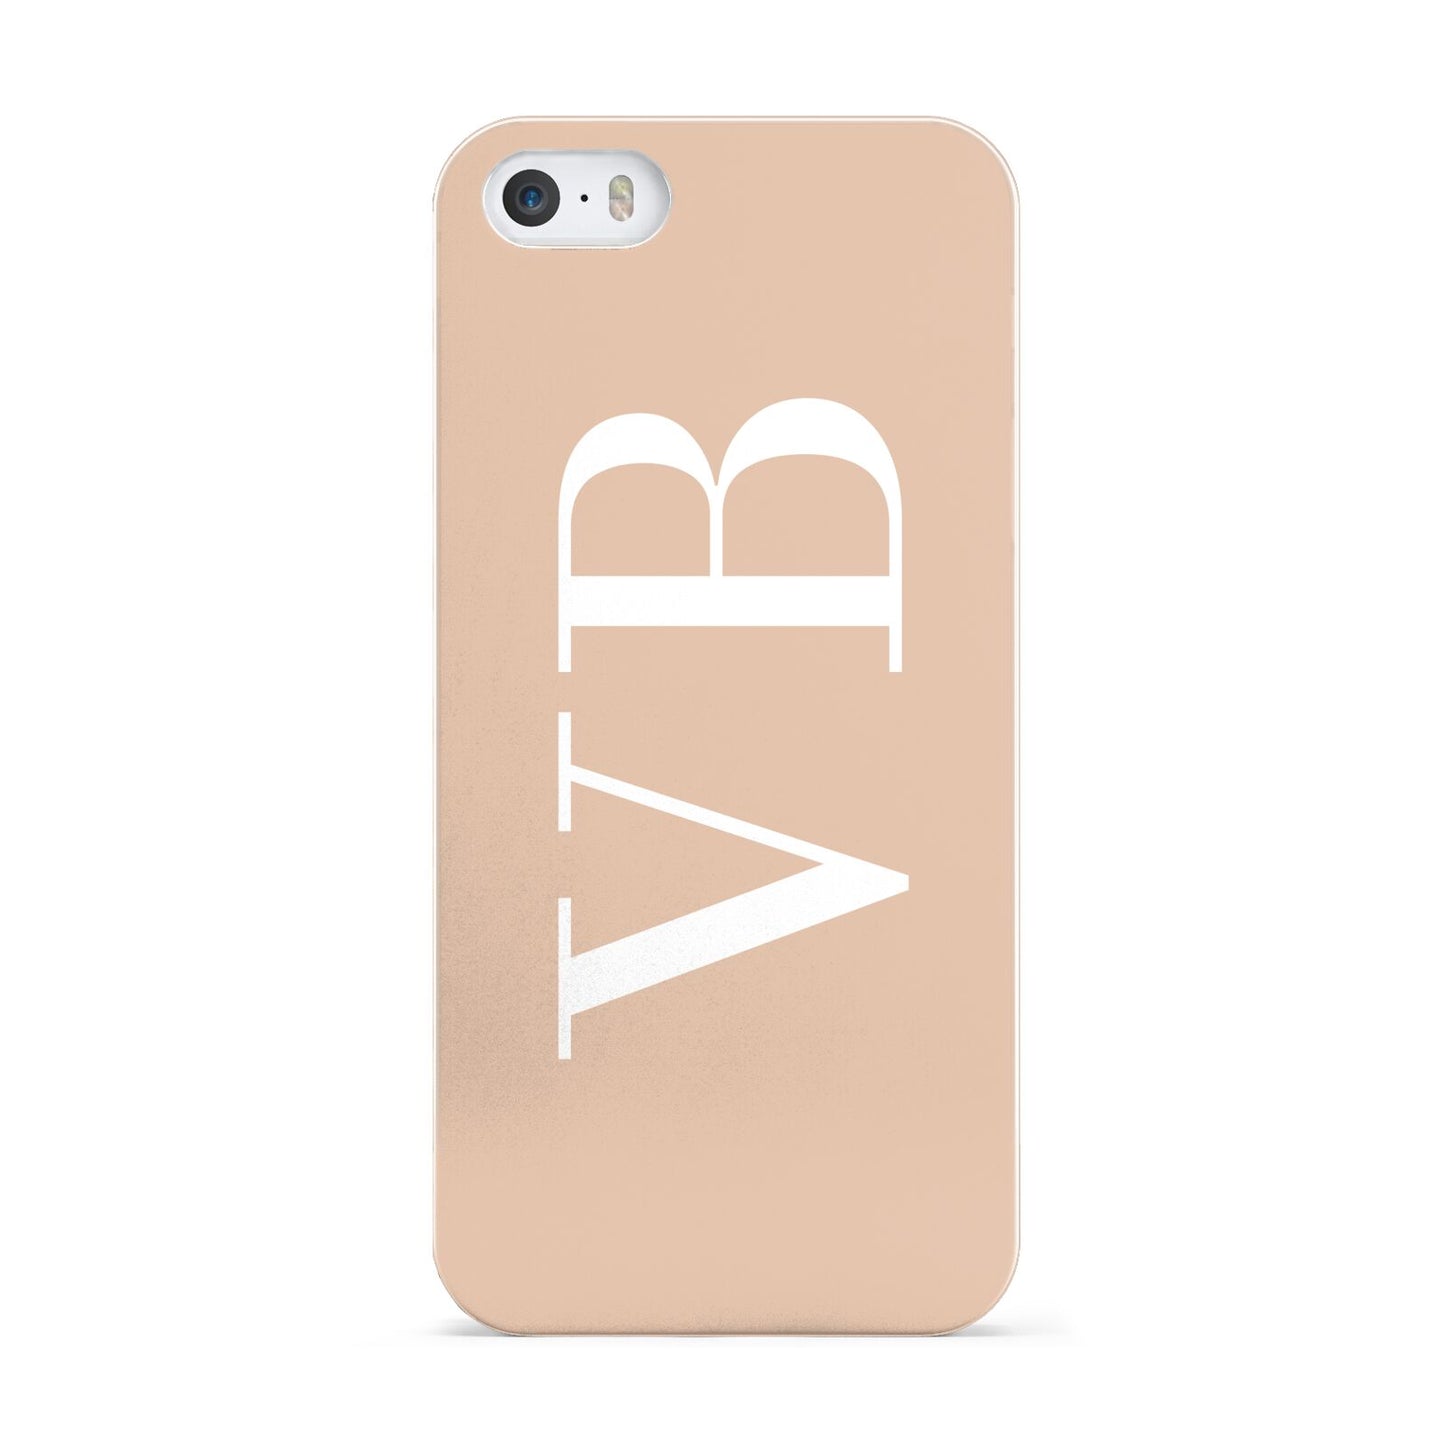 Nude And White Personalised Apple iPhone 5 Case